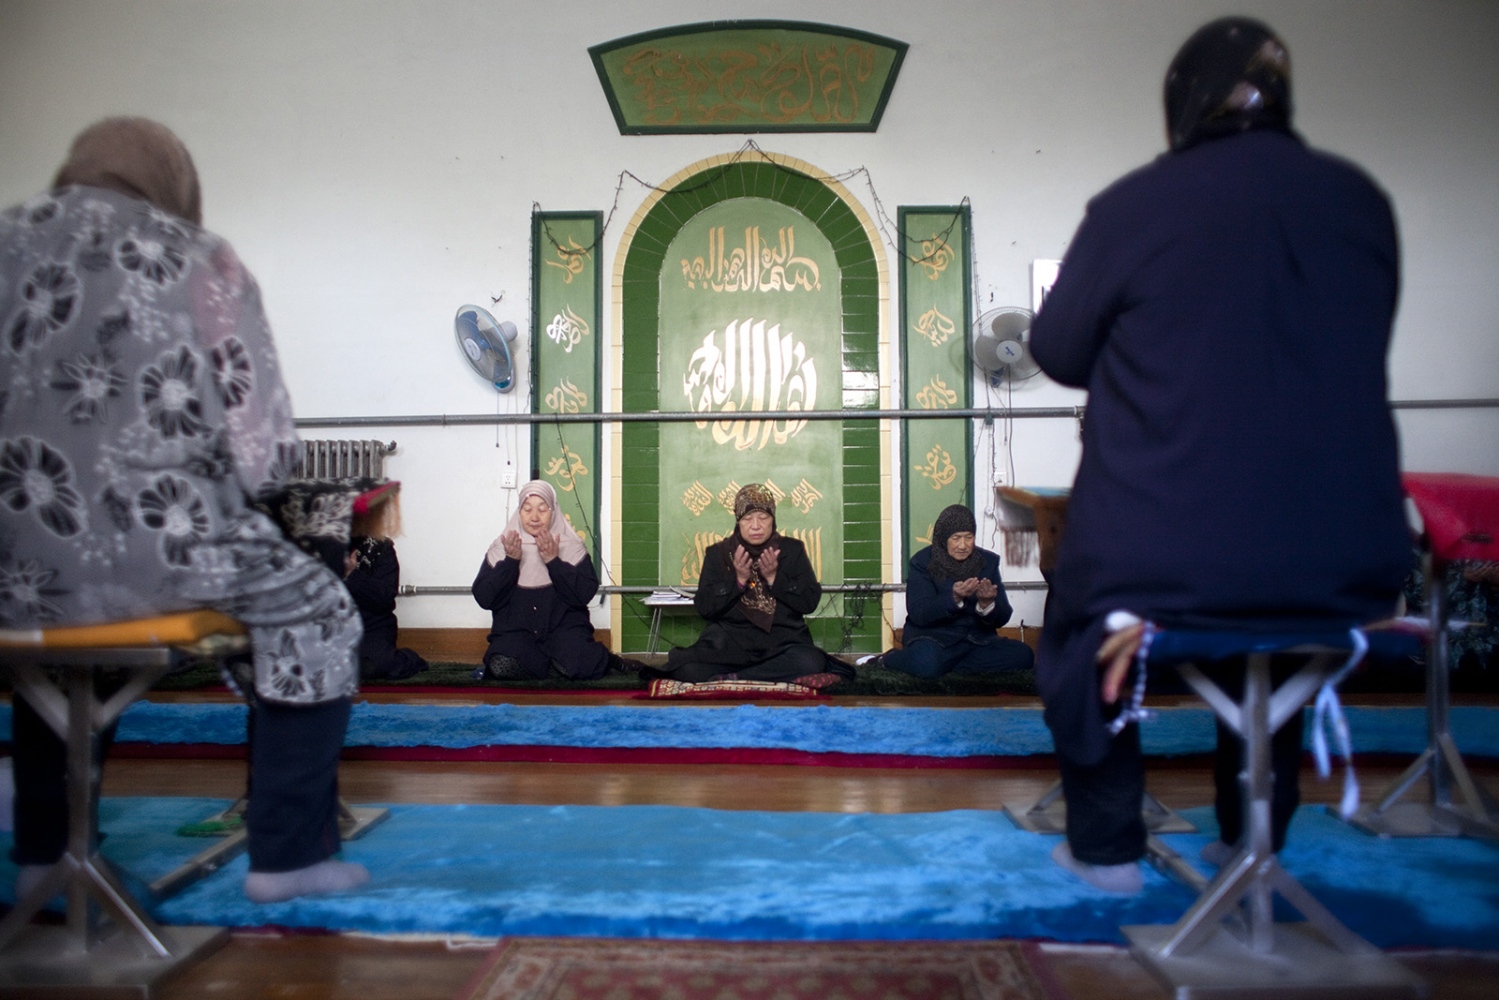 Female Imams in China - 